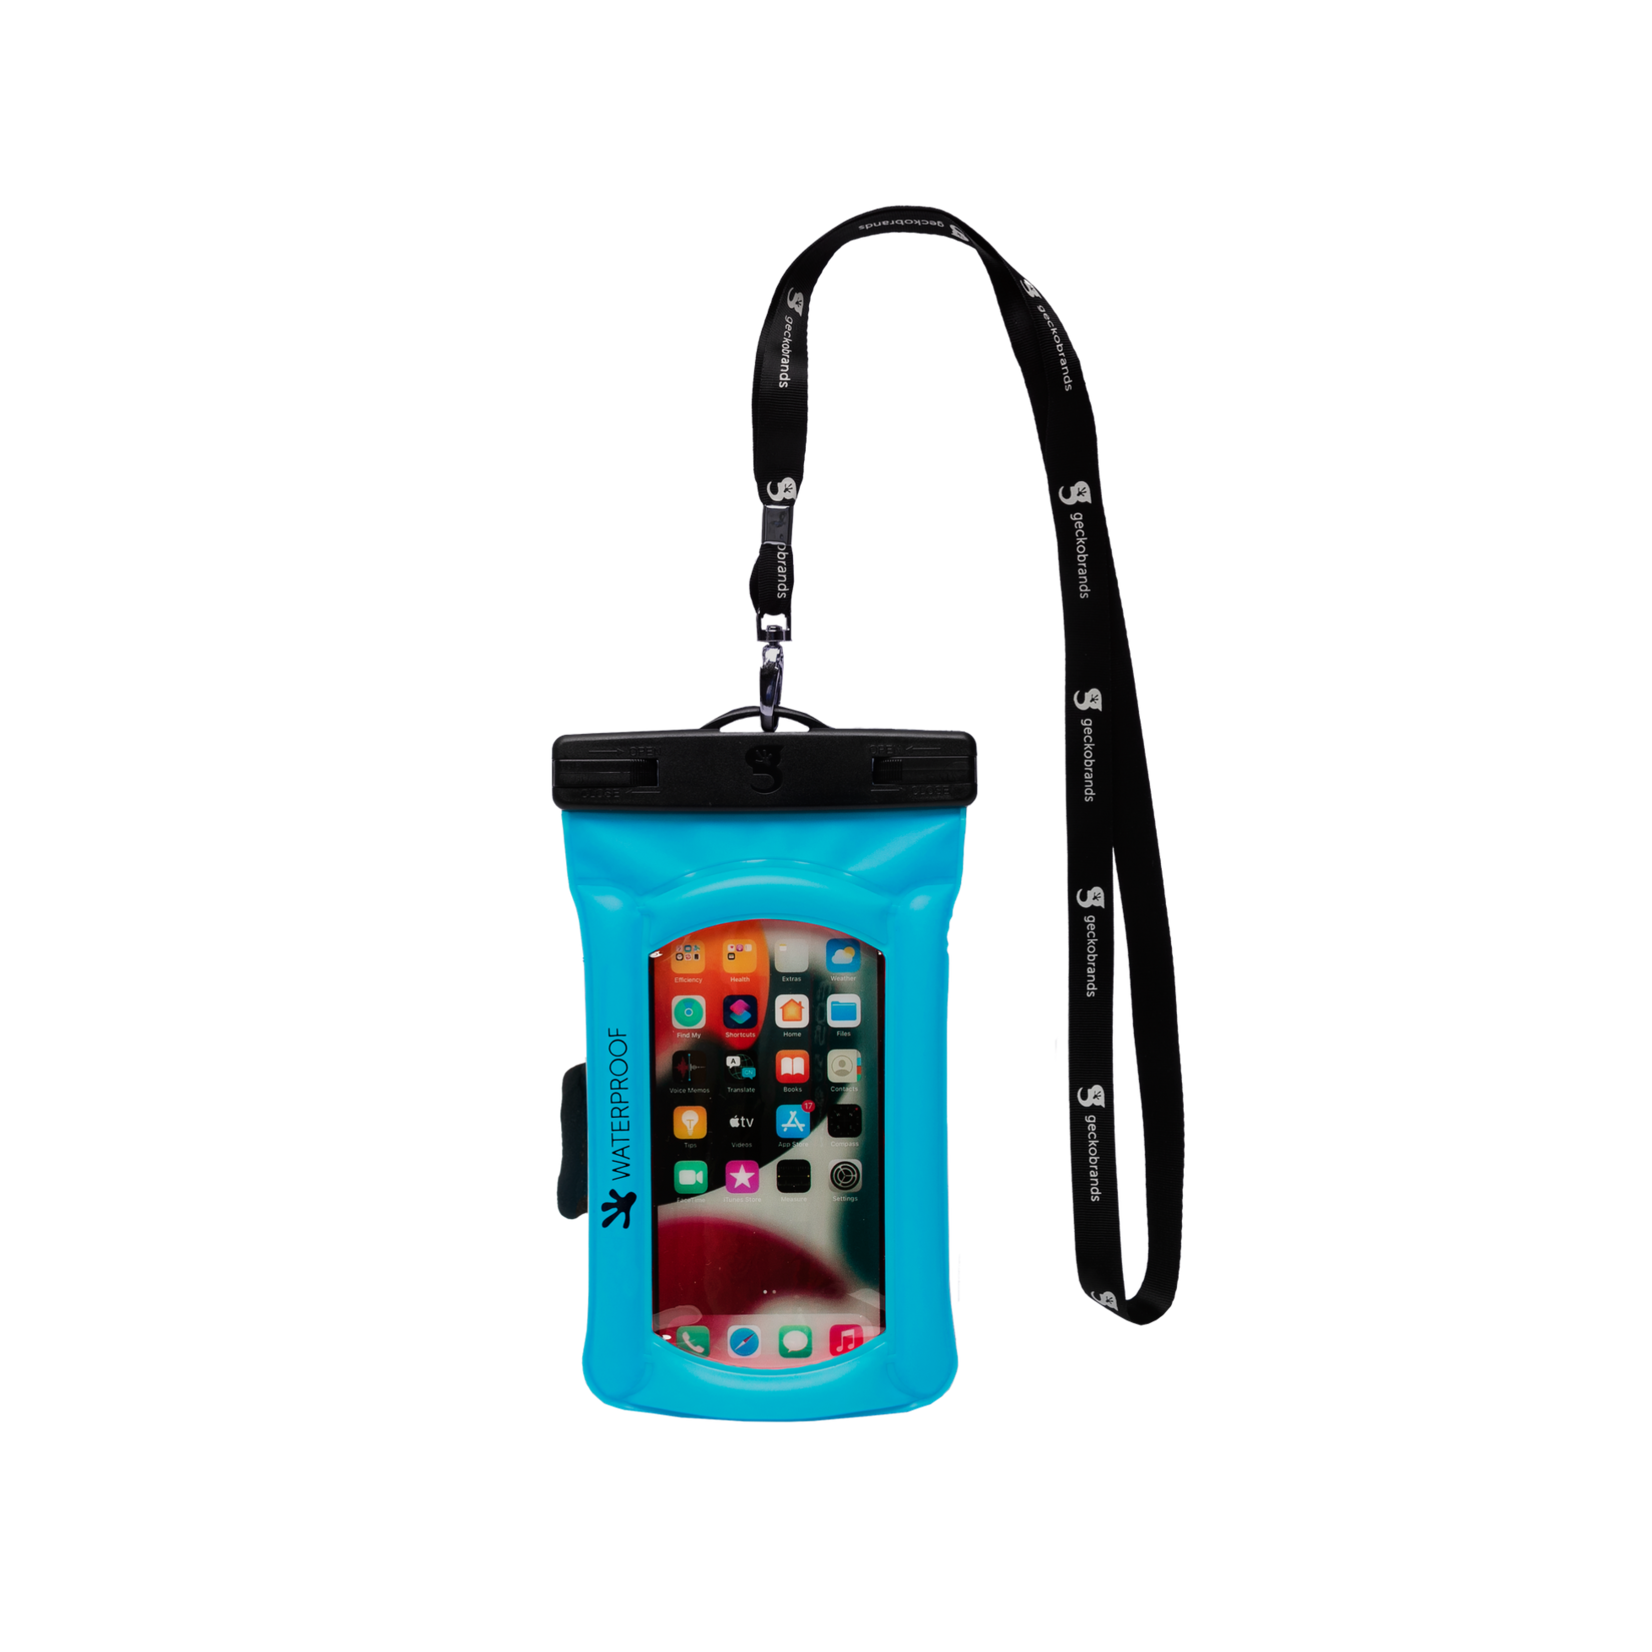 Geckobrands Float Phone Dry Bag with Arm Band